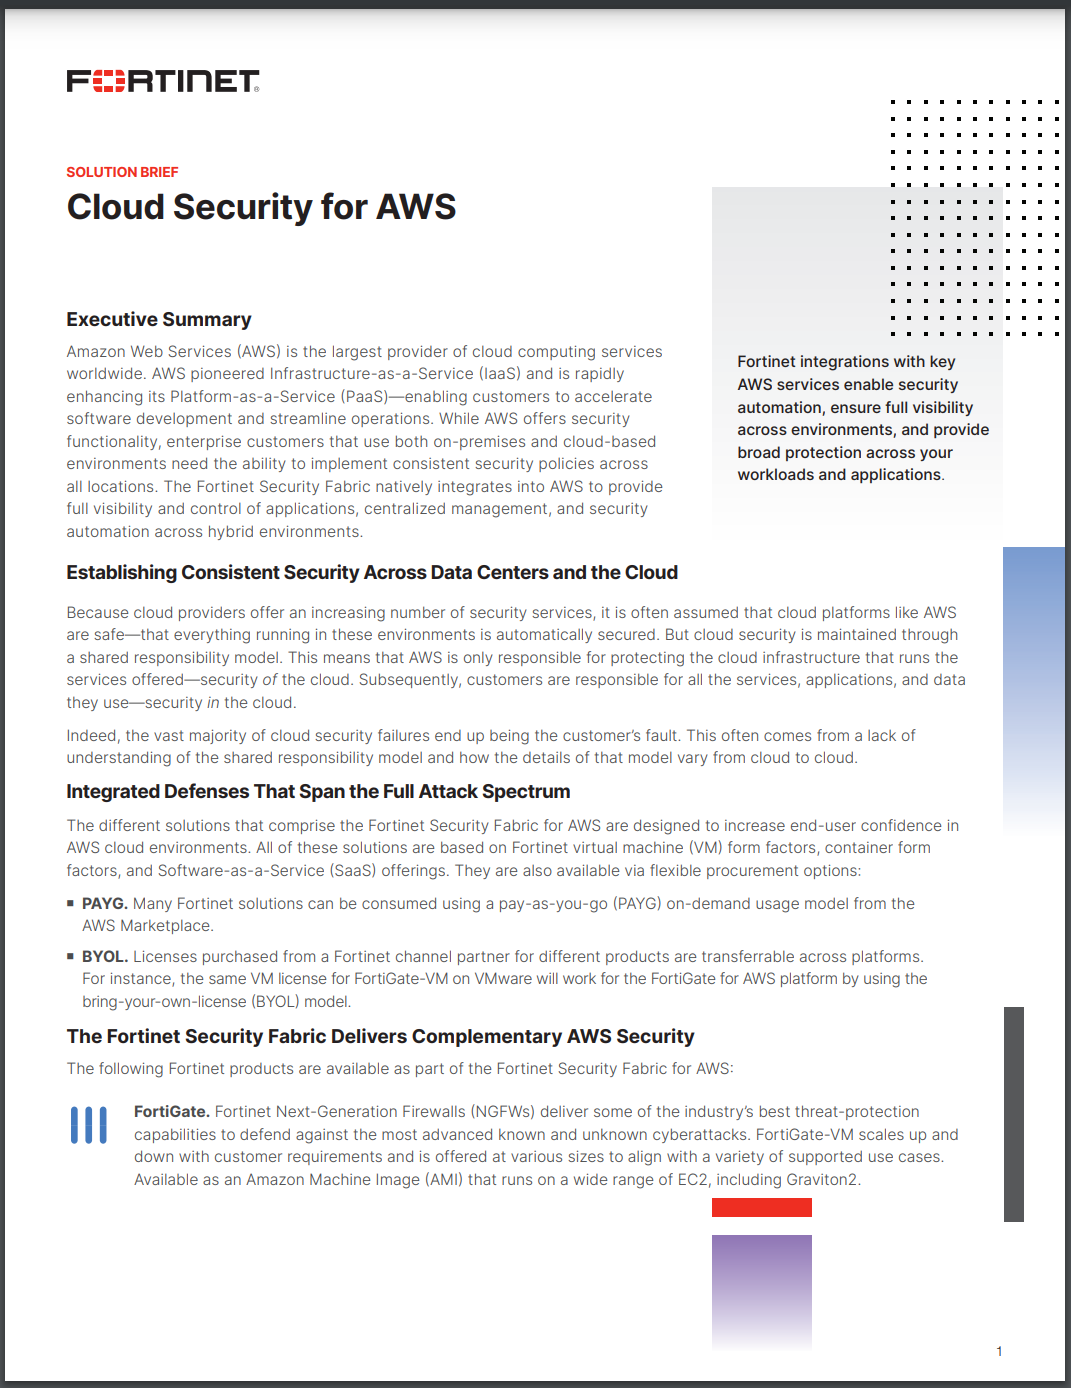 Solution Brief-Cloud Security for AWS (sold in package, 10pc per package)